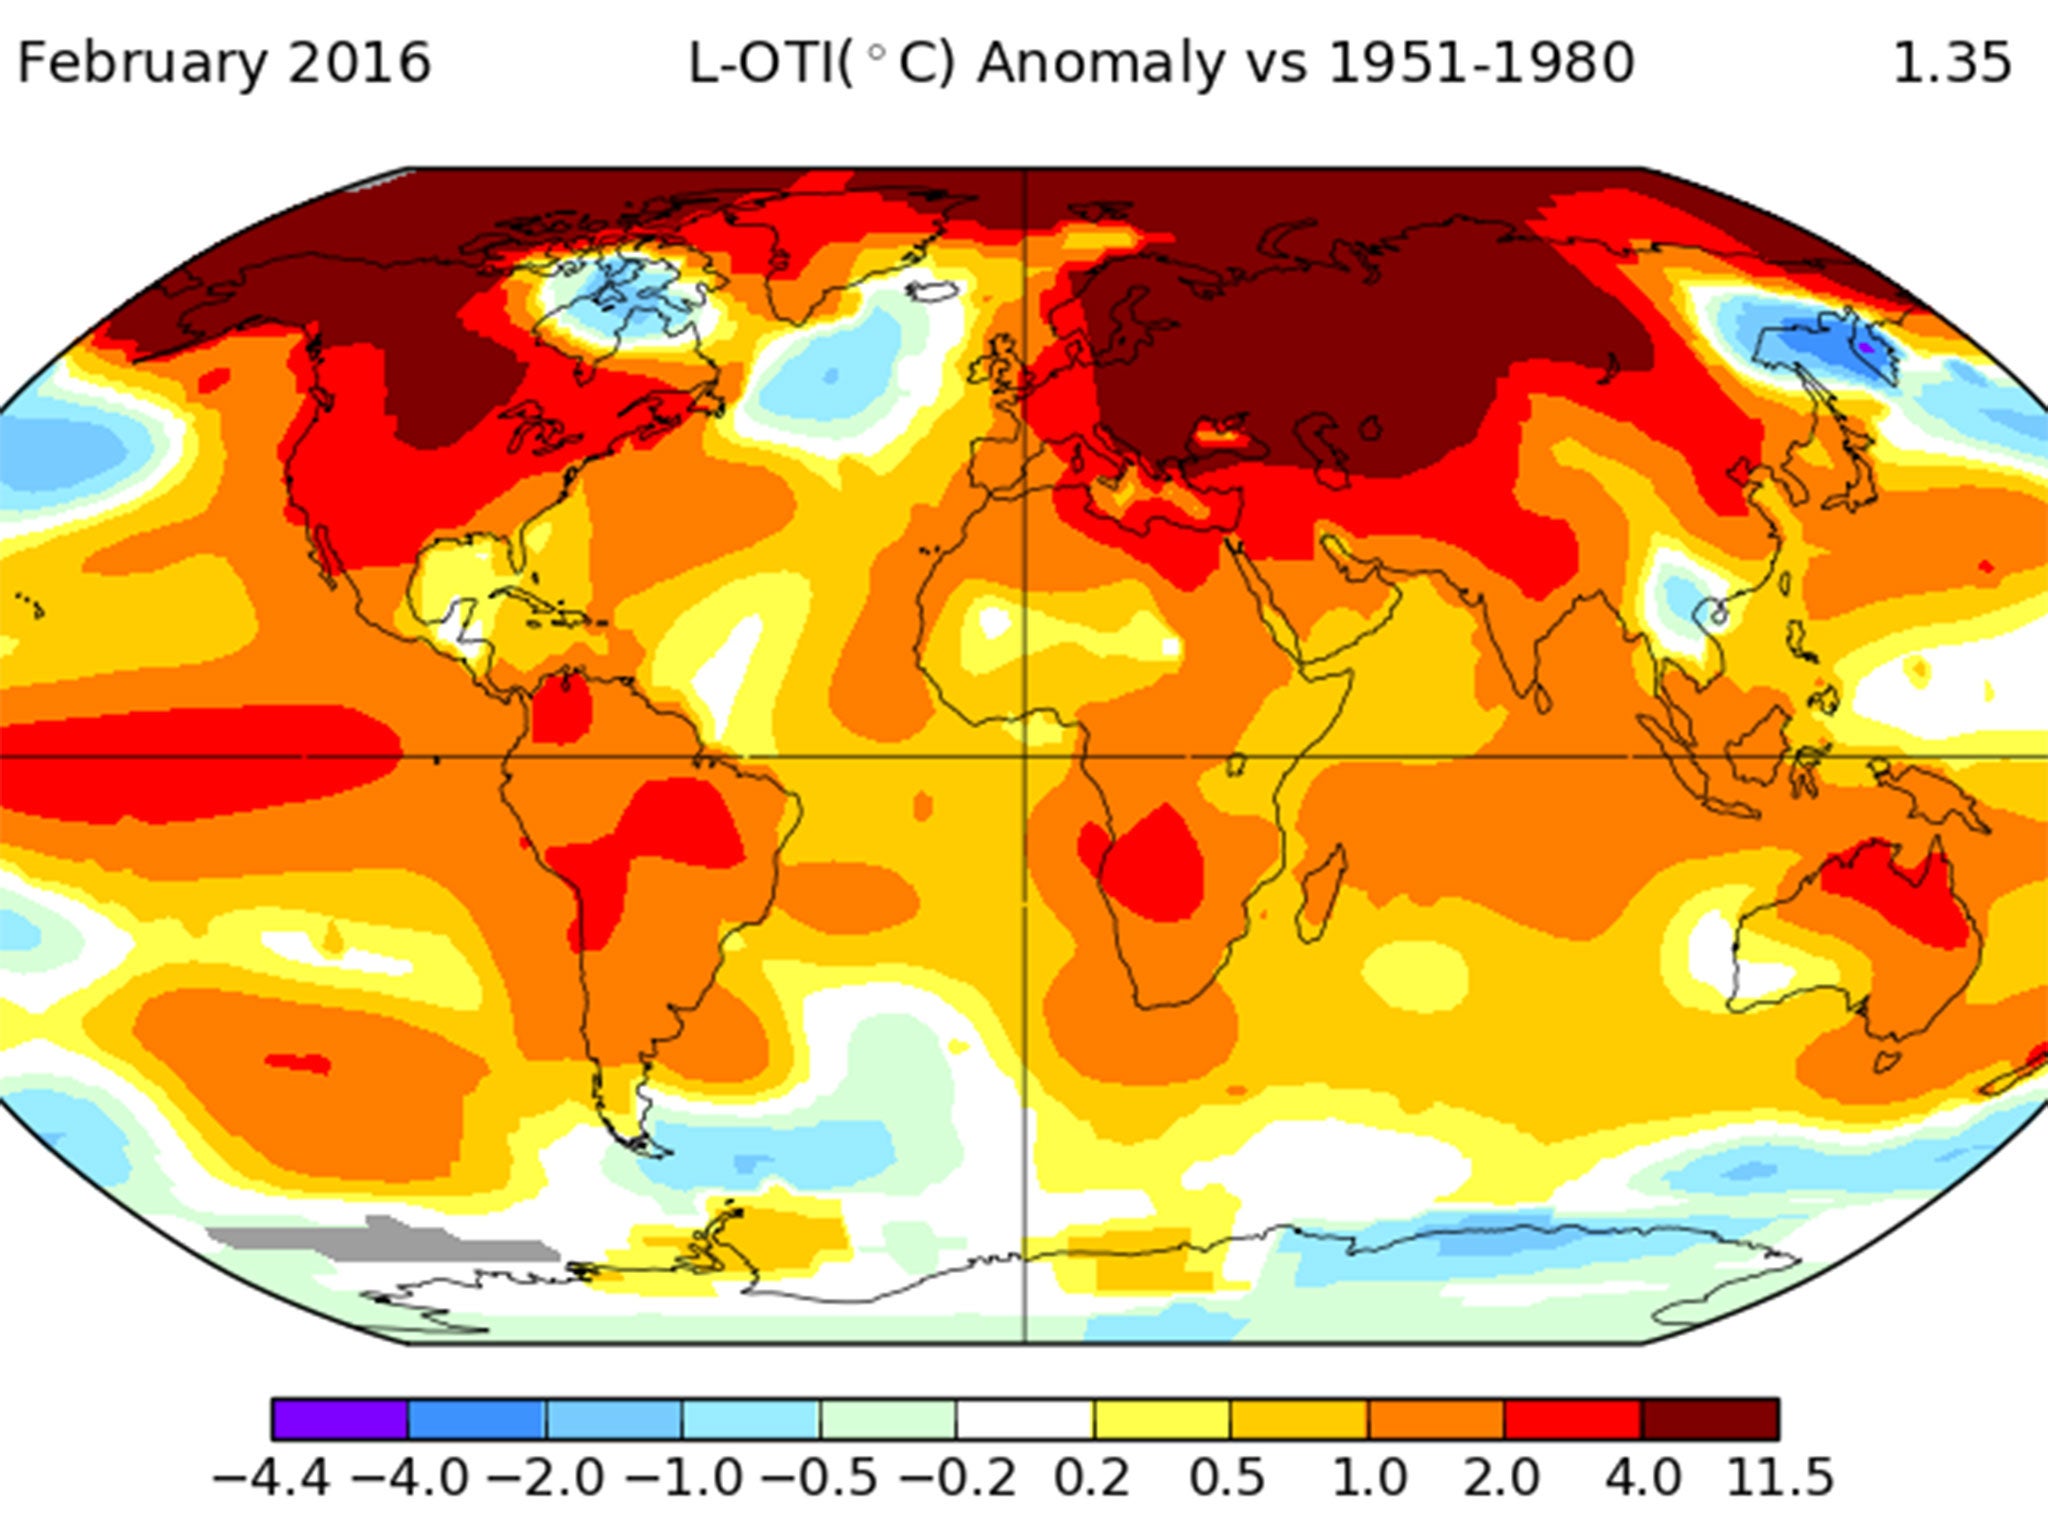 Global surface temperatures across land and ocean in February were 1.35°C warmer than the average temperature for that month, measured from the 1951-1980 baseline.